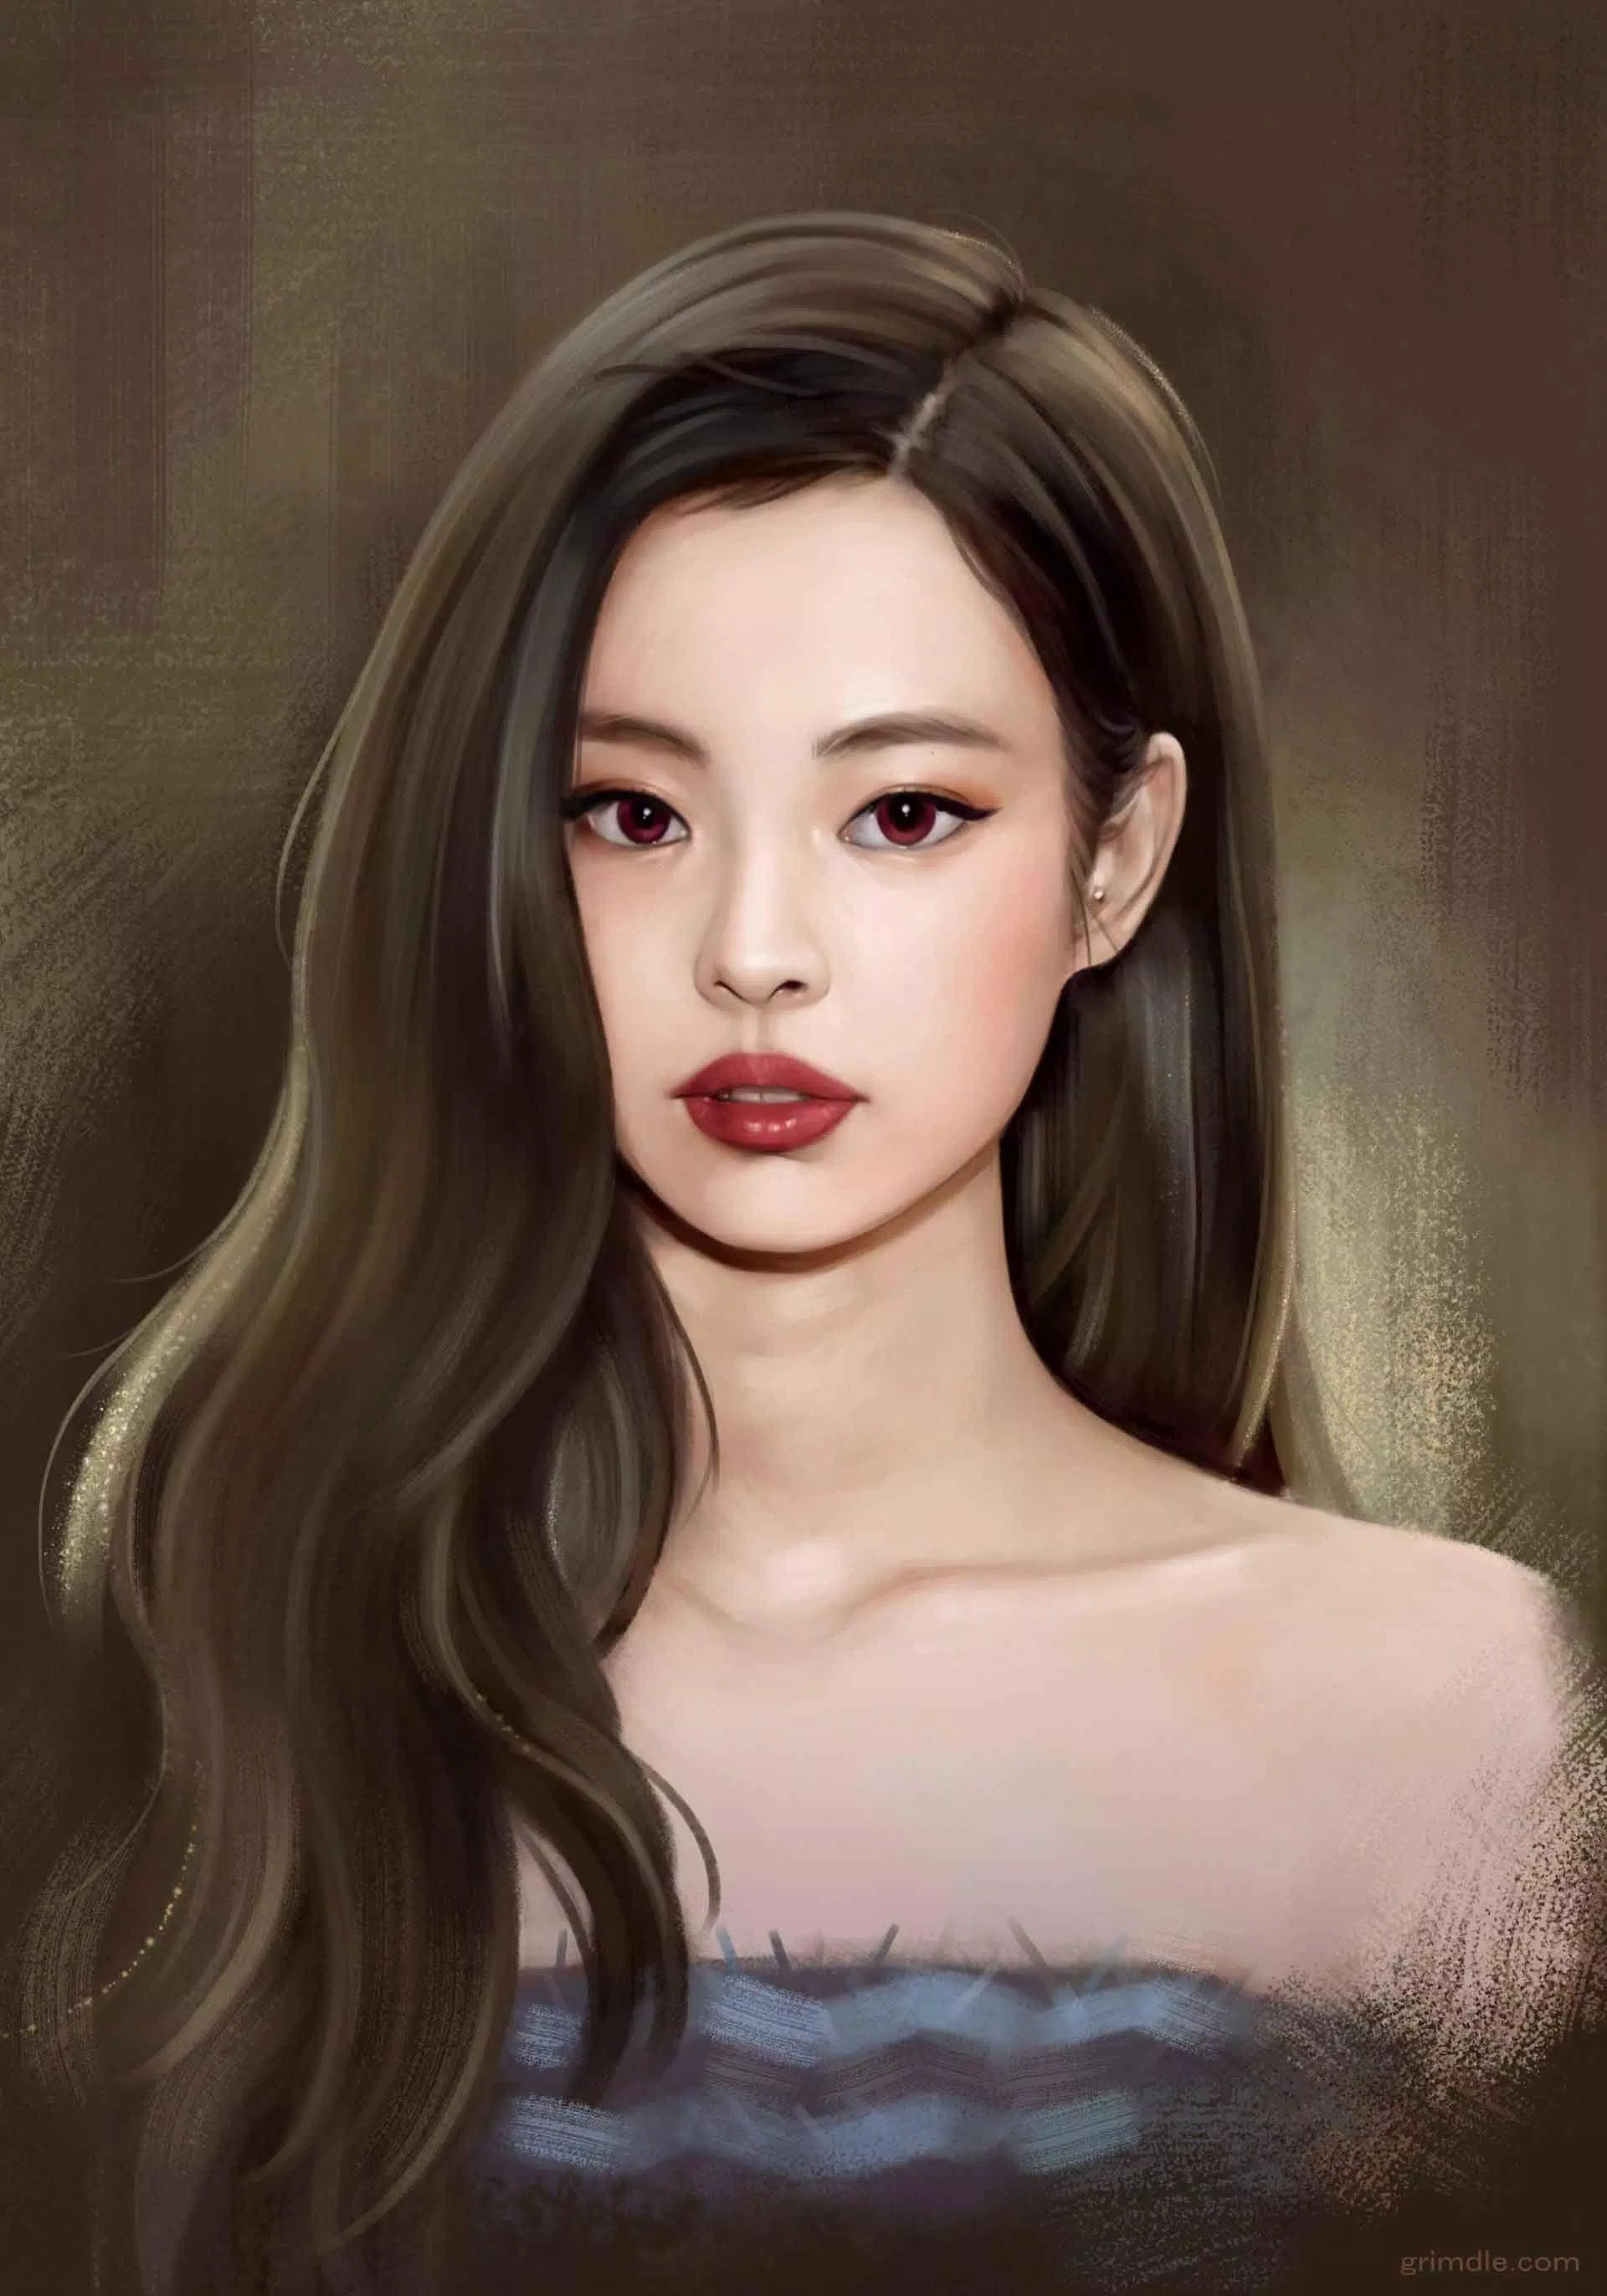 BLACKPINK Jennie Wallpaper Kpop HD New Apk Download for Android- Latest  version 1.0- com.unsei.blackpink.jennie.wallpaper